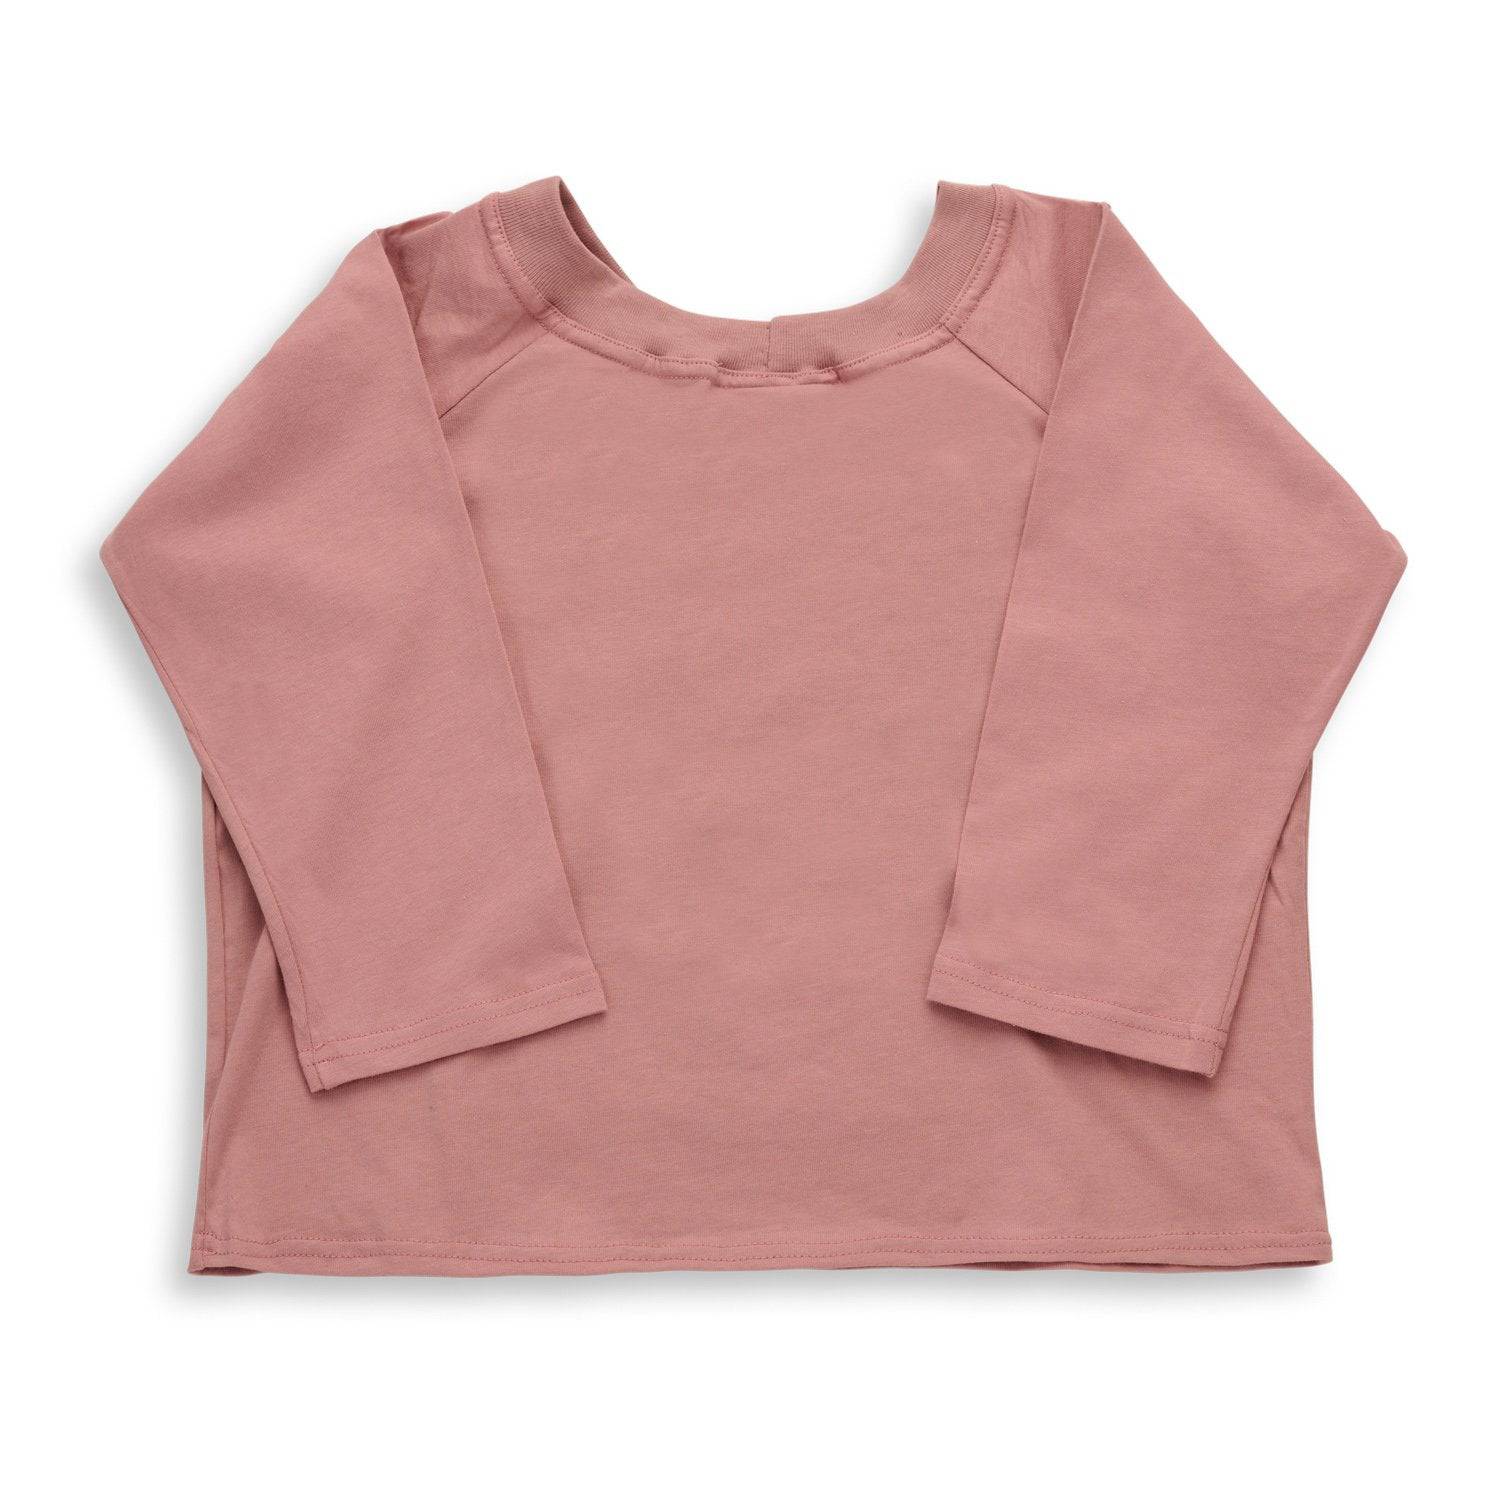 The Boat T-Shirts (boys - pink) - CooCootales